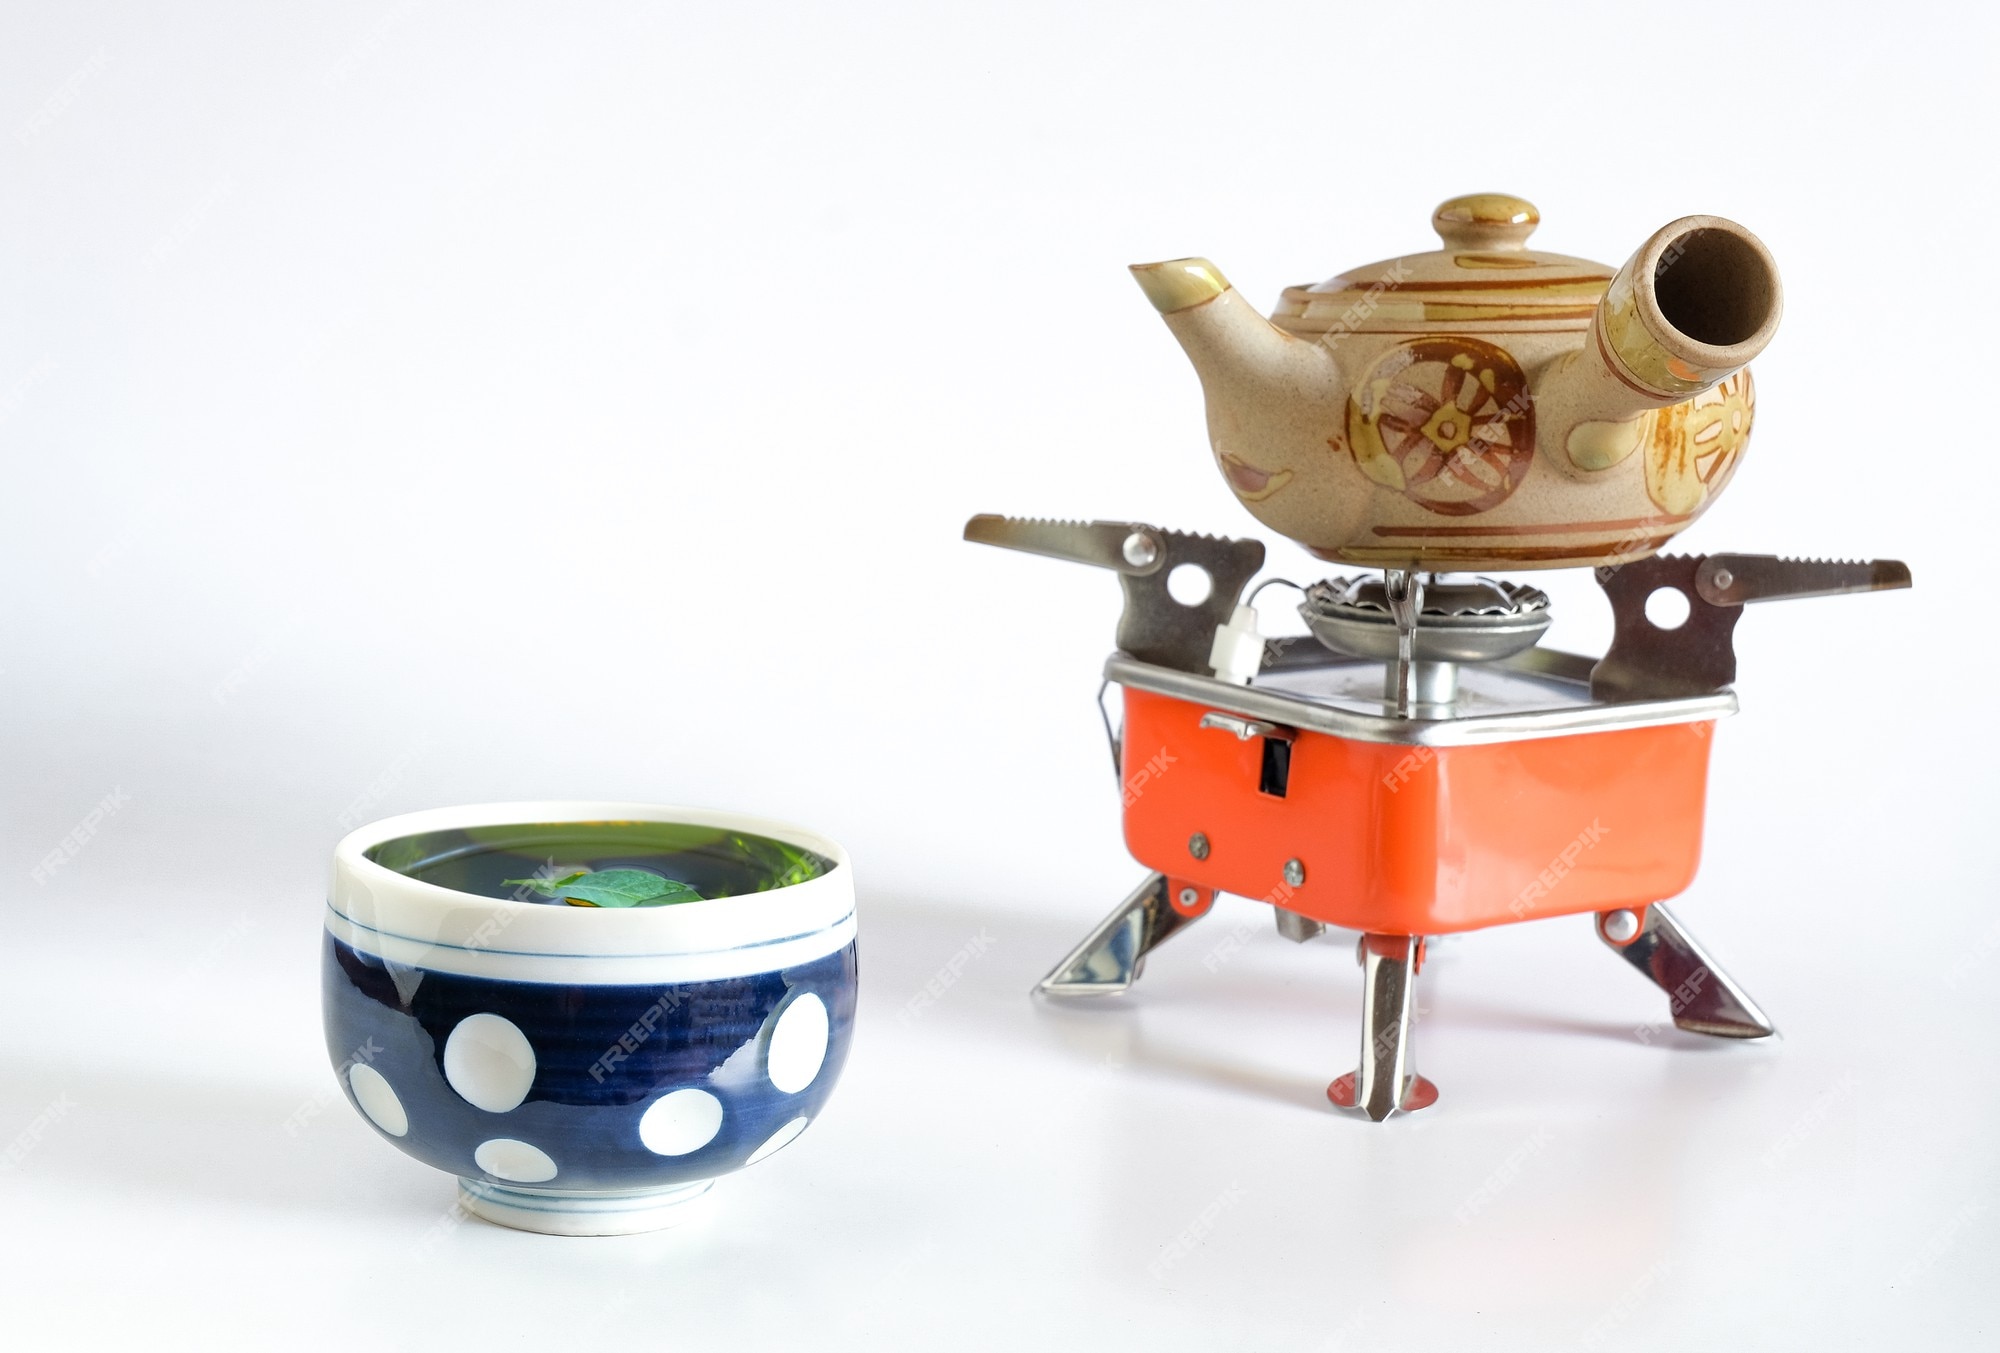 Premium Photo  Vintage tea pot on camping stove for outdoor drinking.